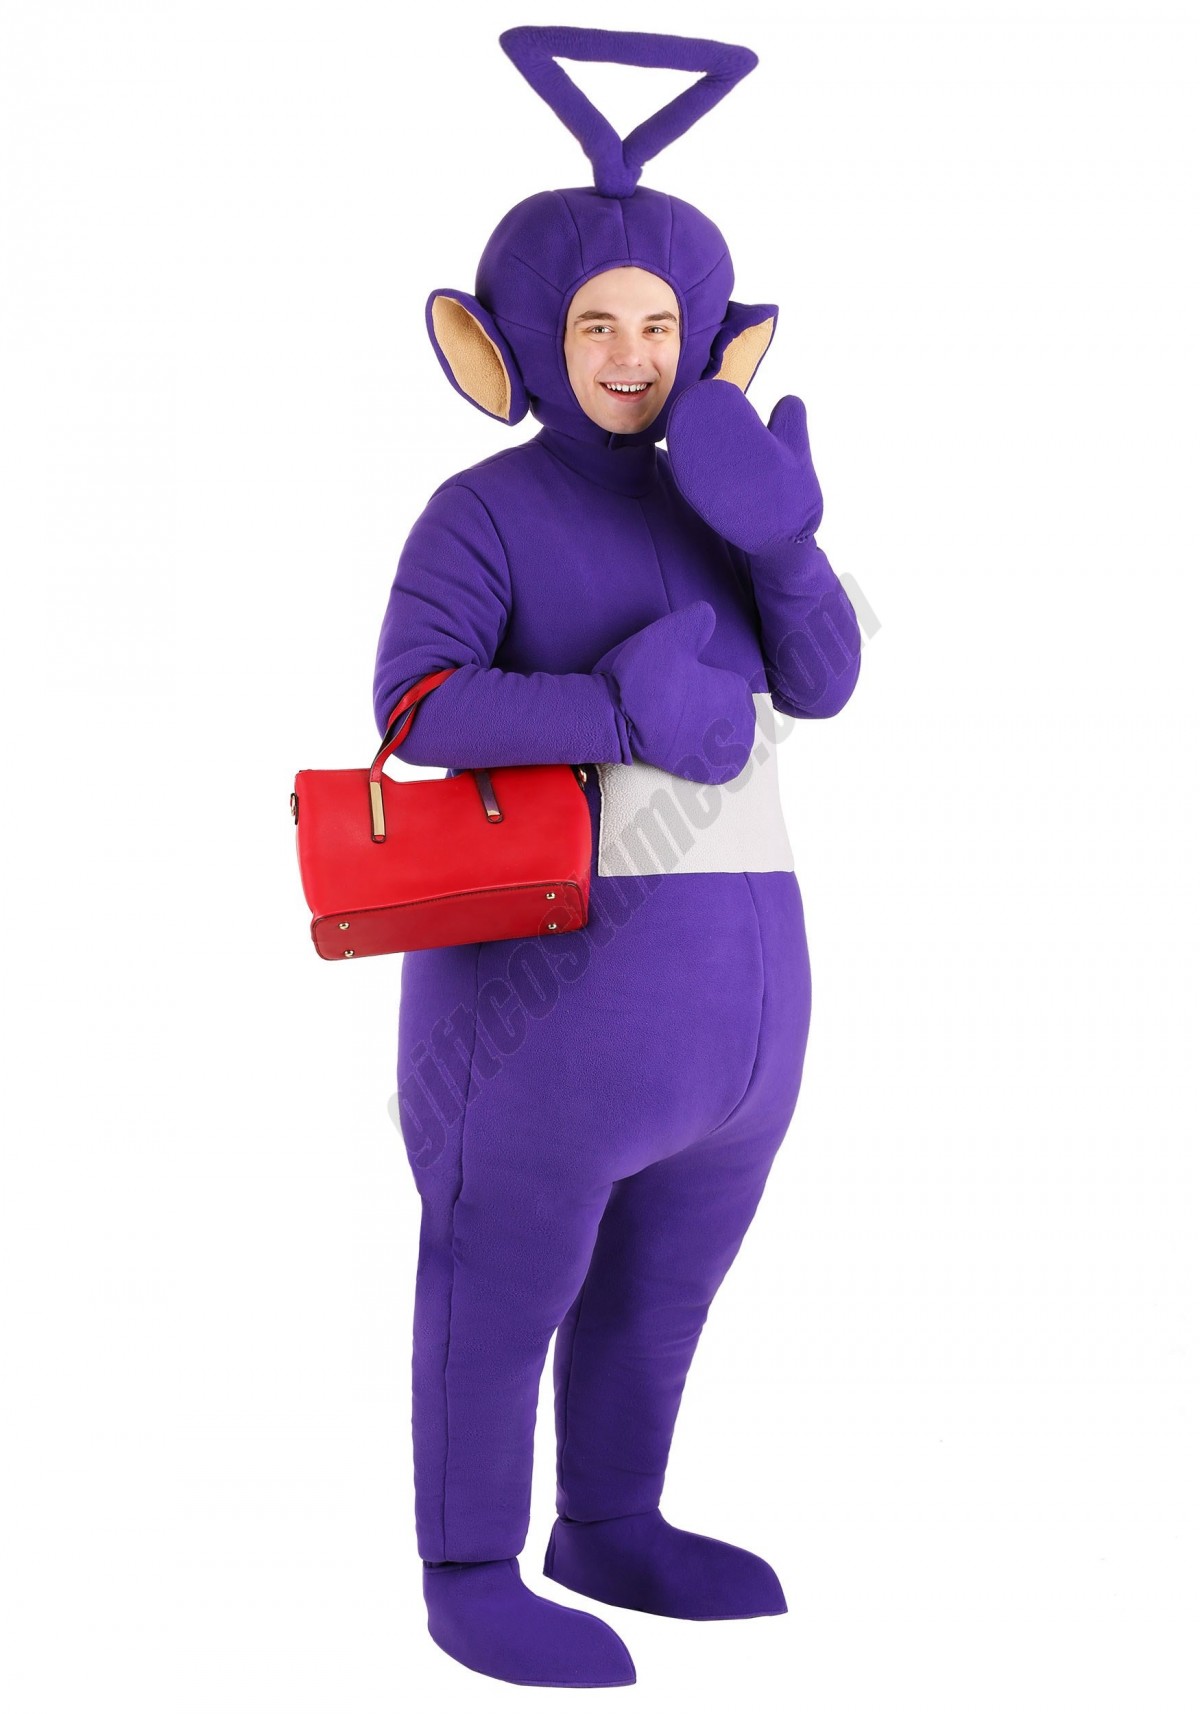 Tinky Winky Teletubbies Adult Costume Promotions - -2